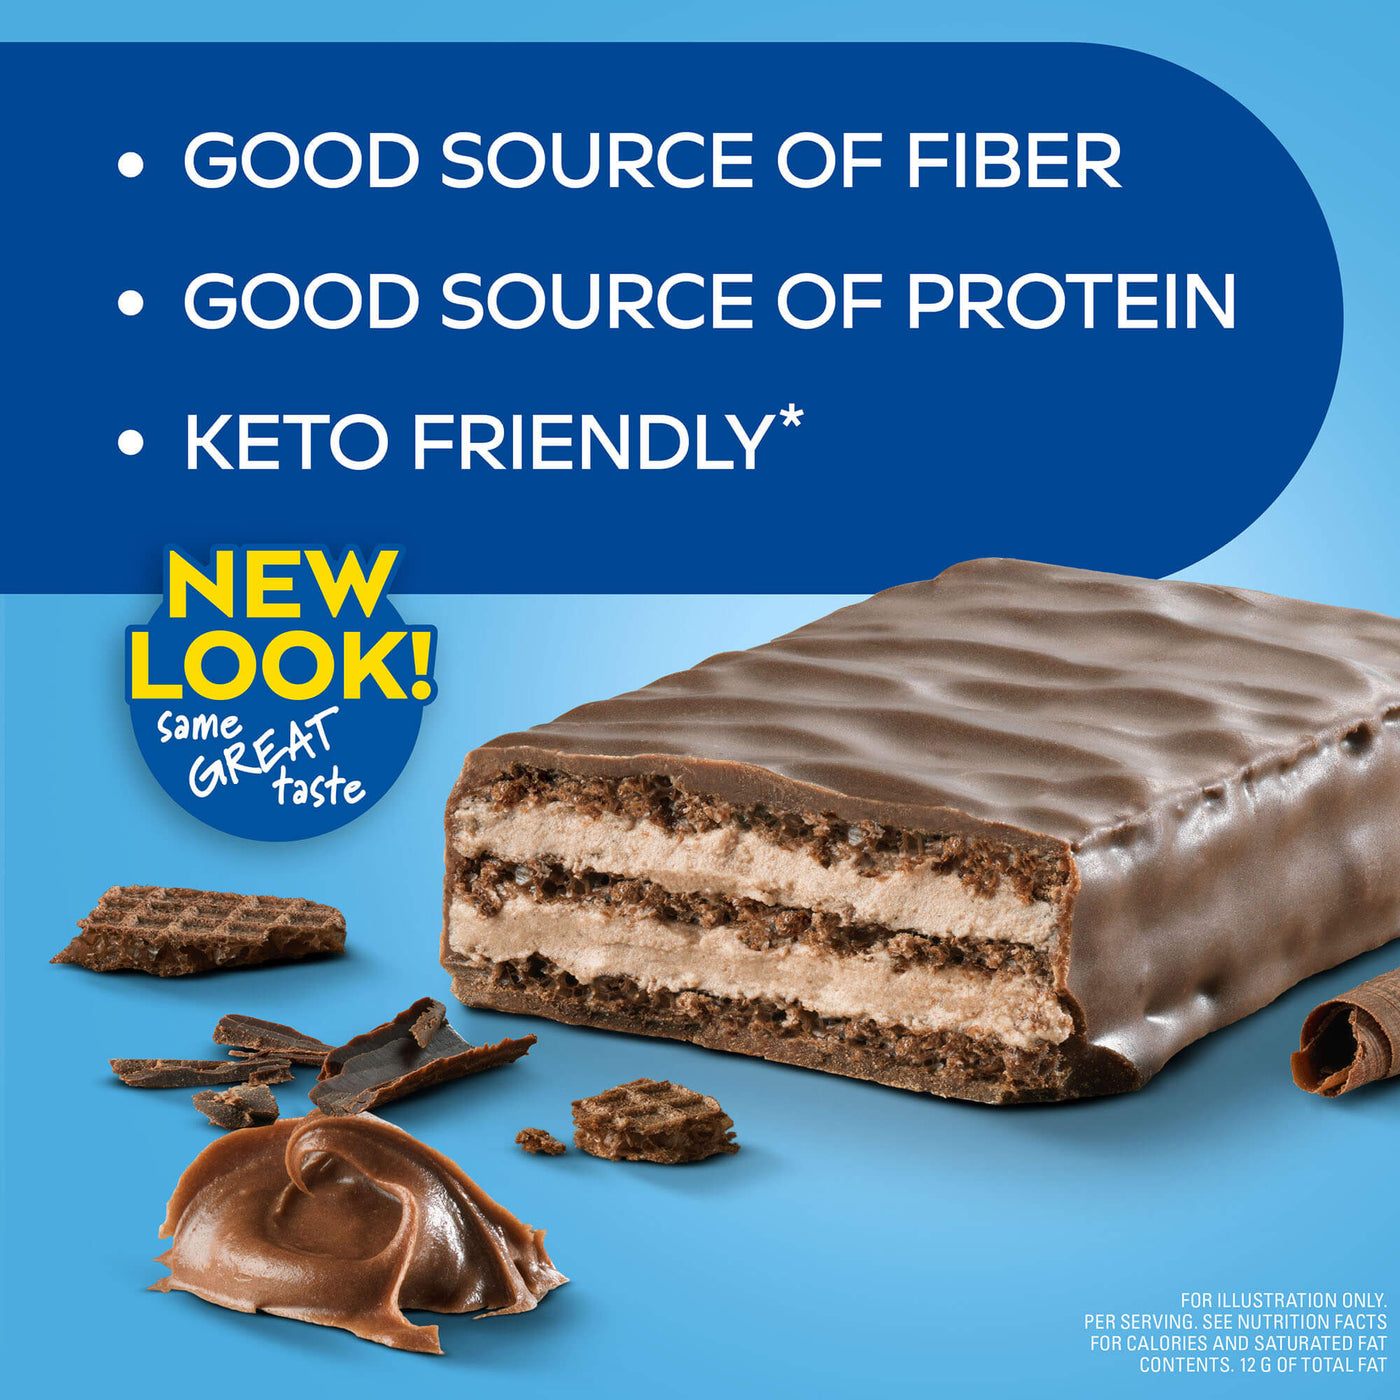 Chocolate Crème Wafer Crisps-Good source of fiber, good source of protein, keto friendly